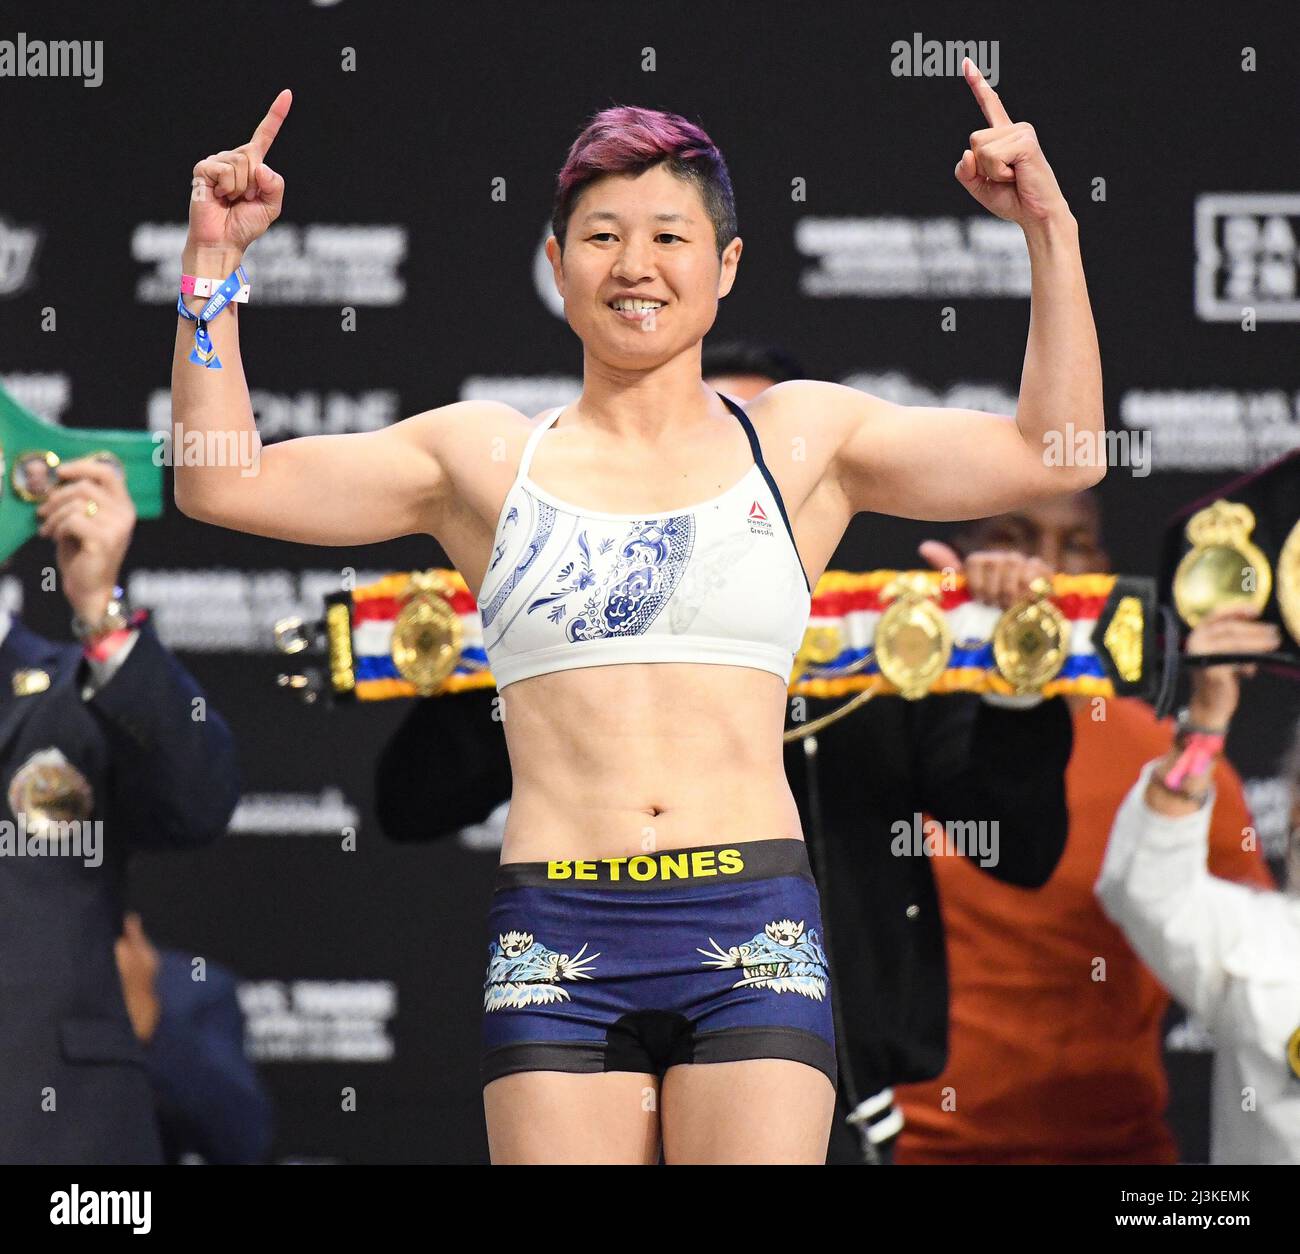 Texas, USA. 08th Apr, 2022. SAN ANTONIO, TX - APRIL 8: Naoka Fujioka (111.6) during the weigh-in for her WBA, WBC, & Vacant Ring Magazine Flyweight title against Marlen Esparza (111.4lbs) at the Alamodome Stadium, on April 8, 2022, in San Antonio, Texas, USA (Photo by Mikael Ona/PxImages) Credit: Px Images/Alamy Live News Stock Photo